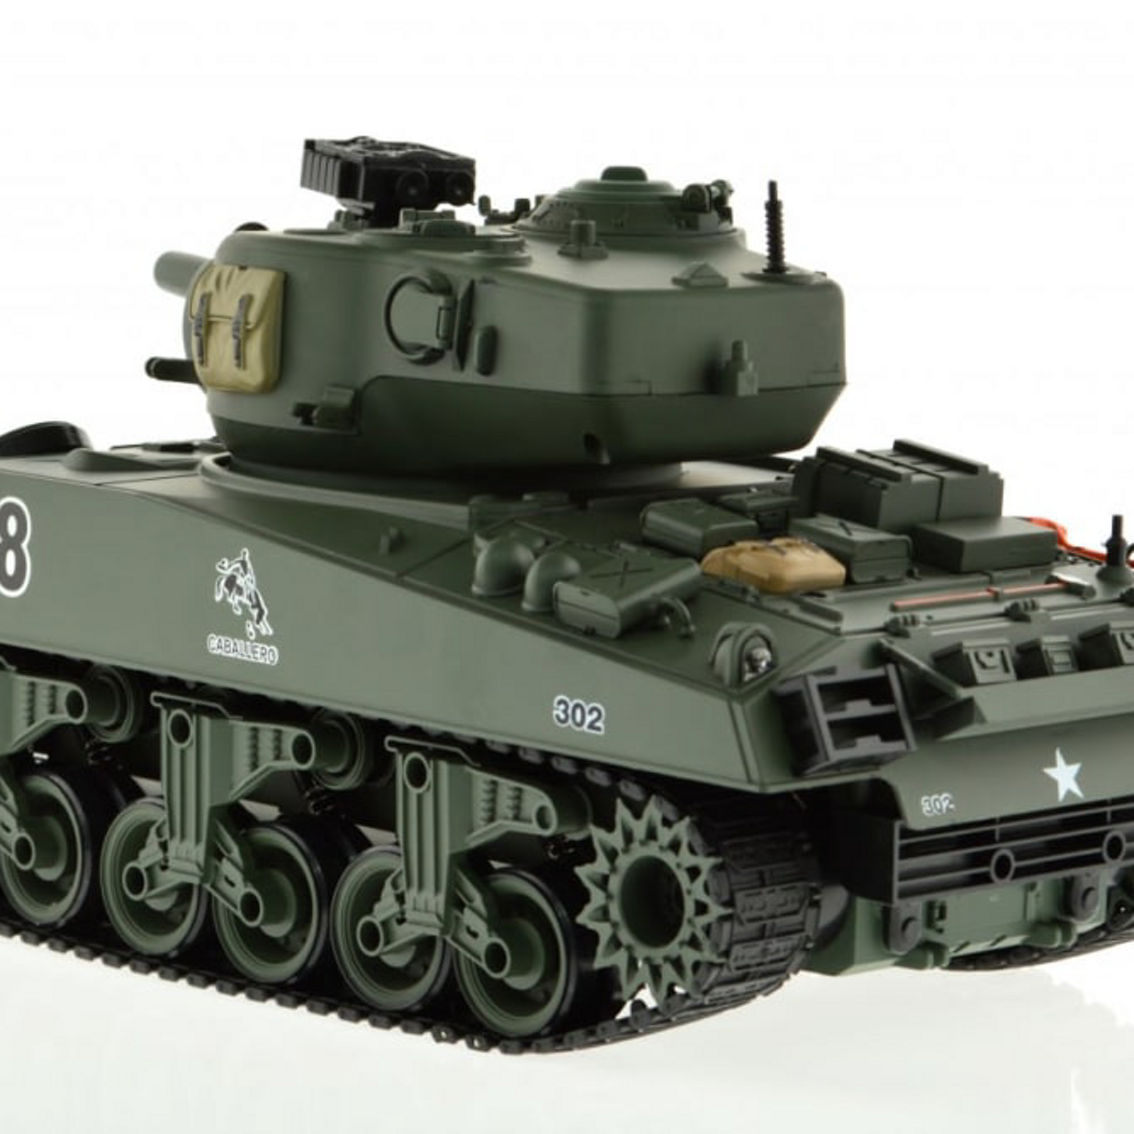 CIS-YZ-828 1:18 scale WWII USA Sherman tank with lights sound and BB gun - Image 3 of 5